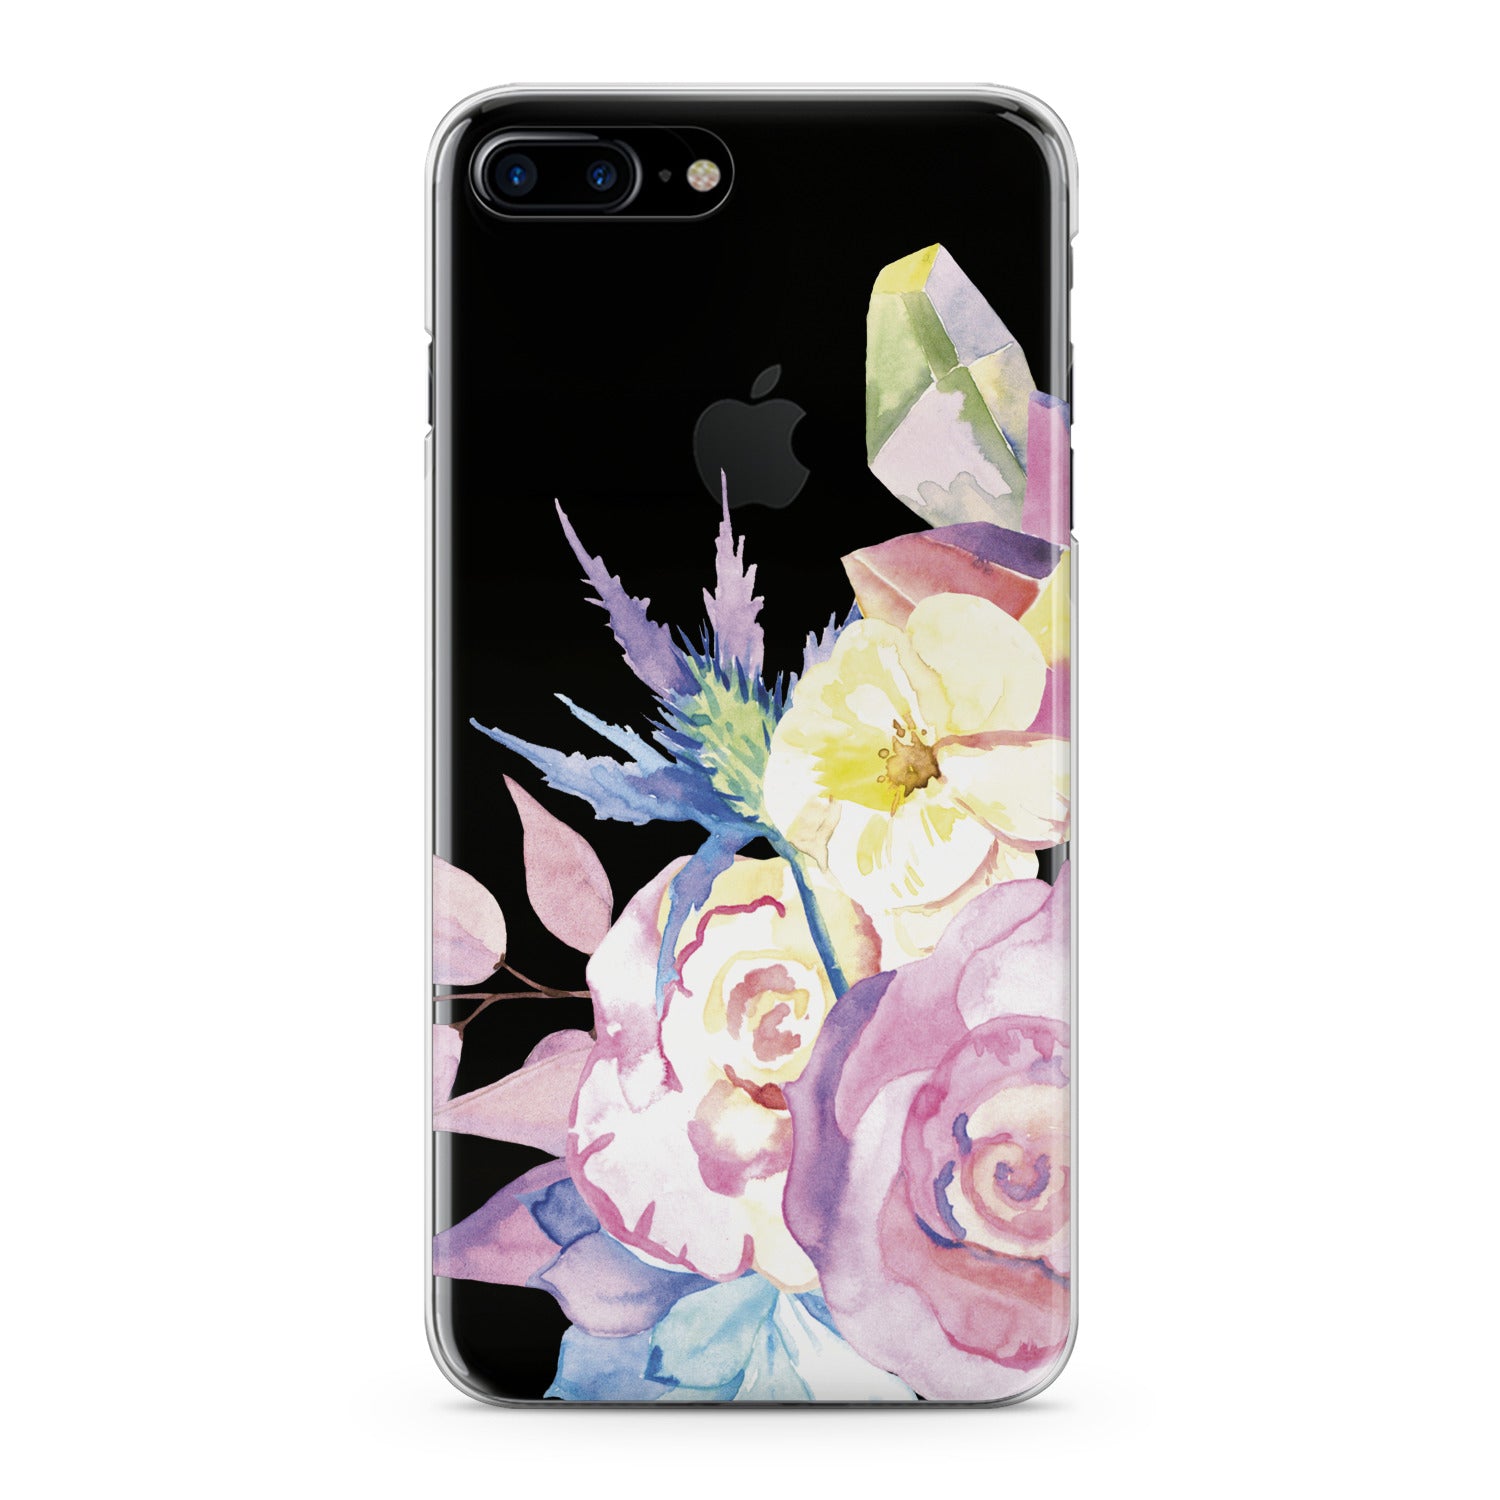 Lex Altern Pastel Blossom Phone Case for your iPhone & Android phone.